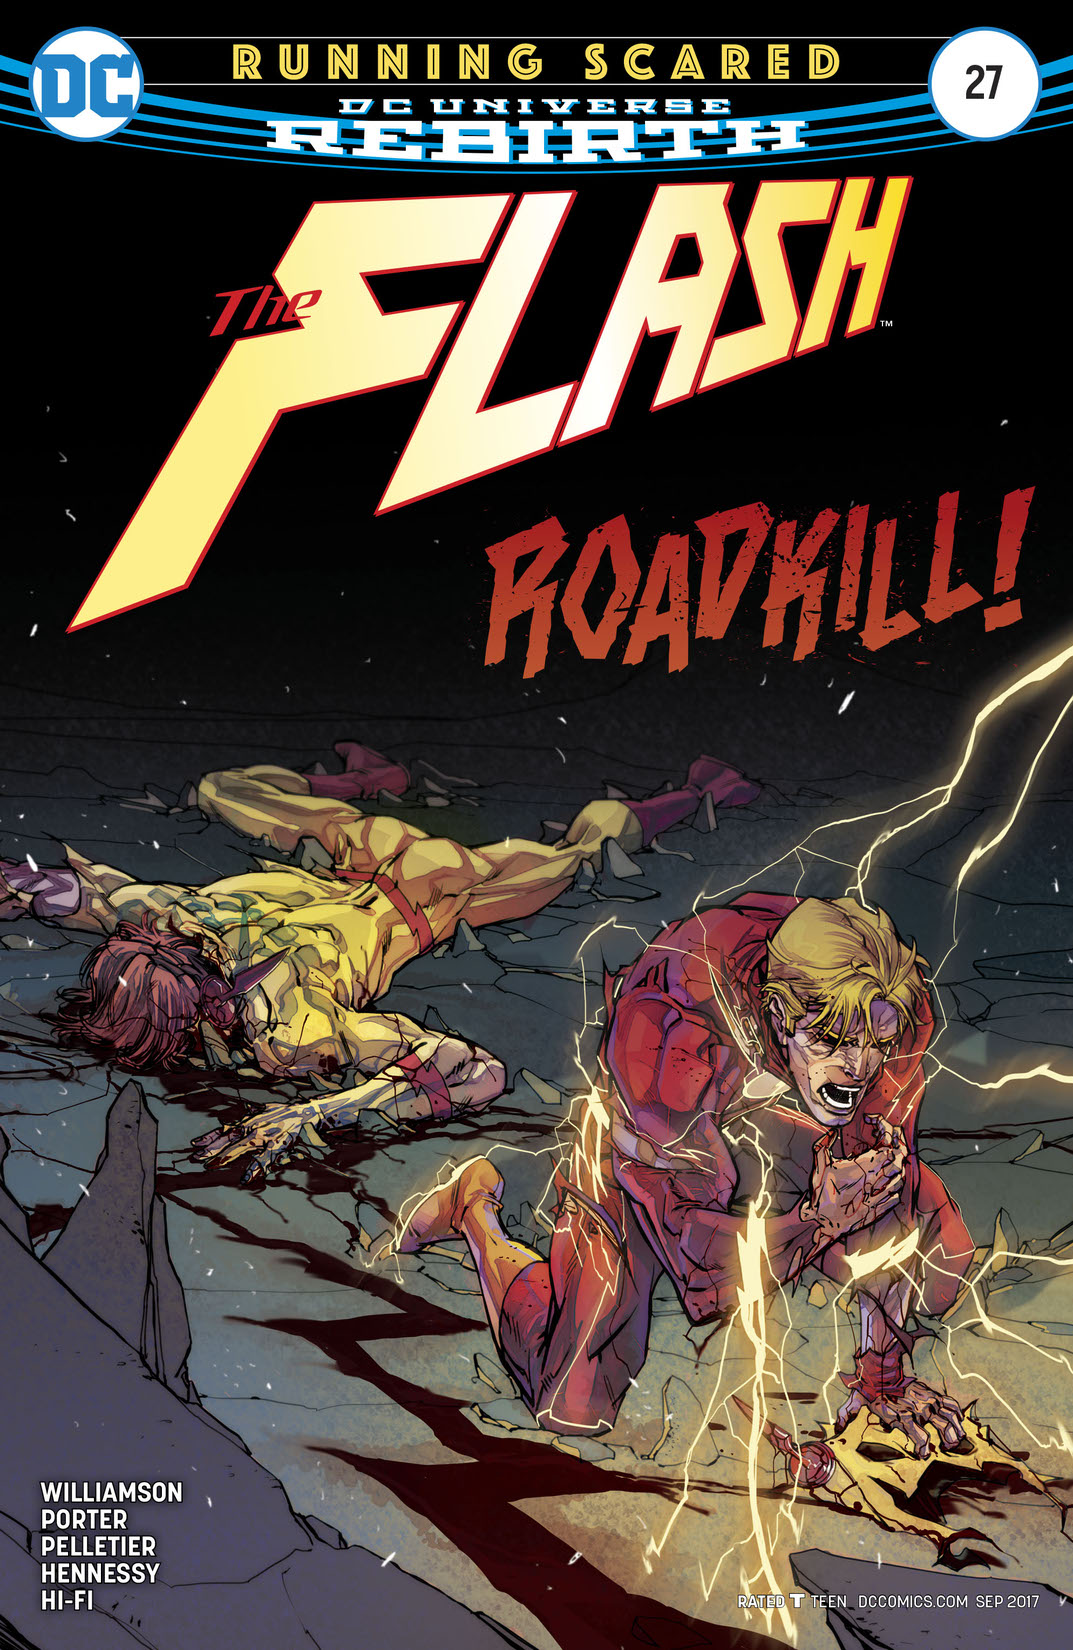 The Flash (2016-) #27 preview images